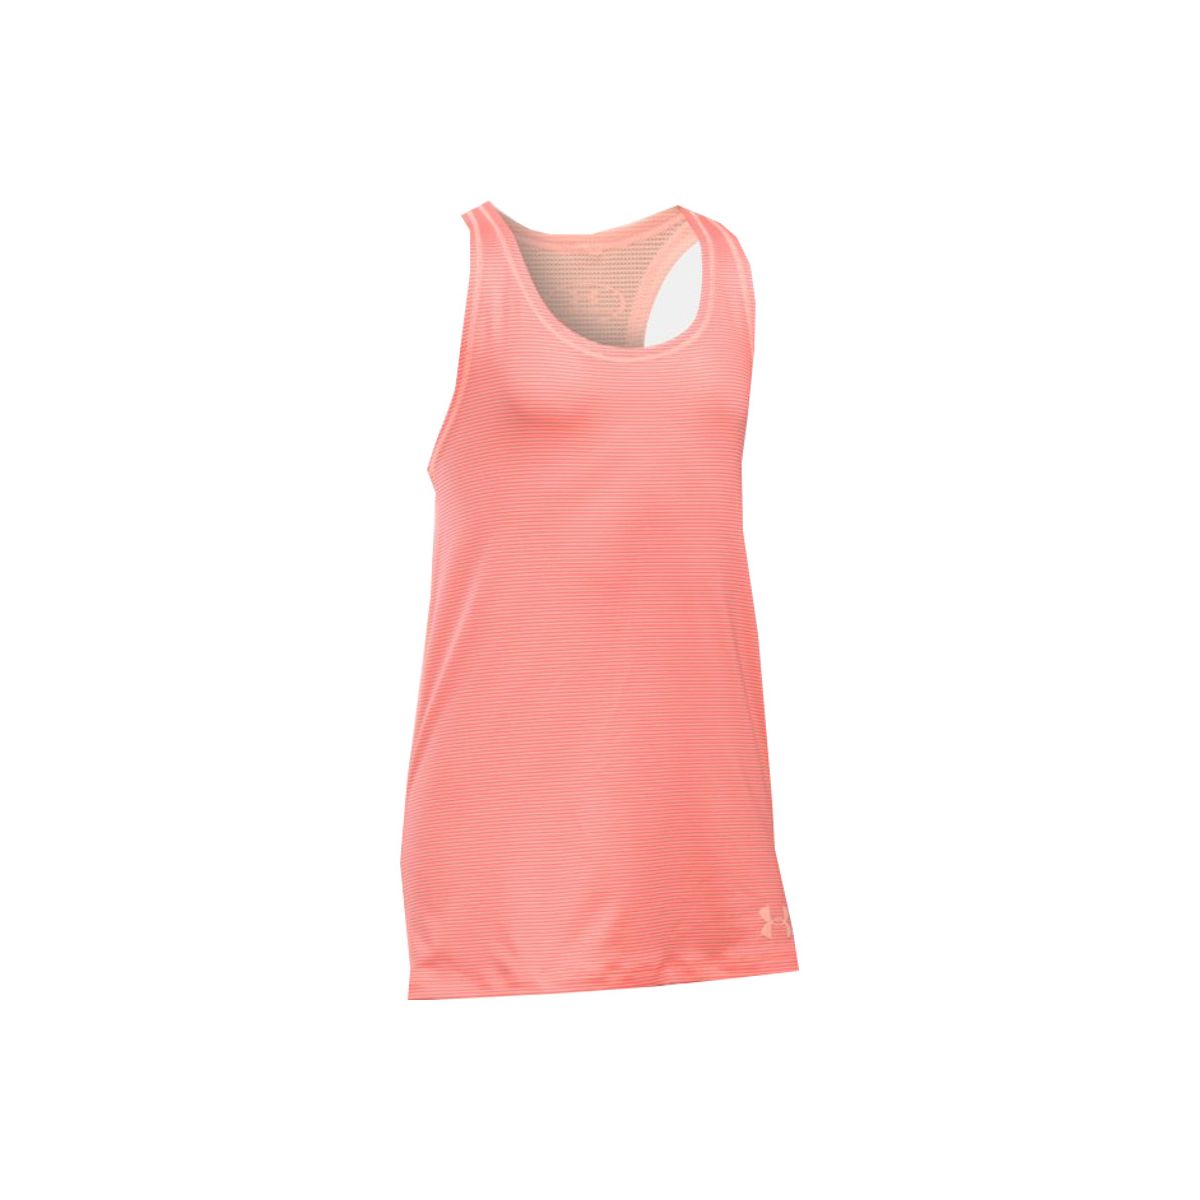 Under Armour Girl's Top 1289879-404